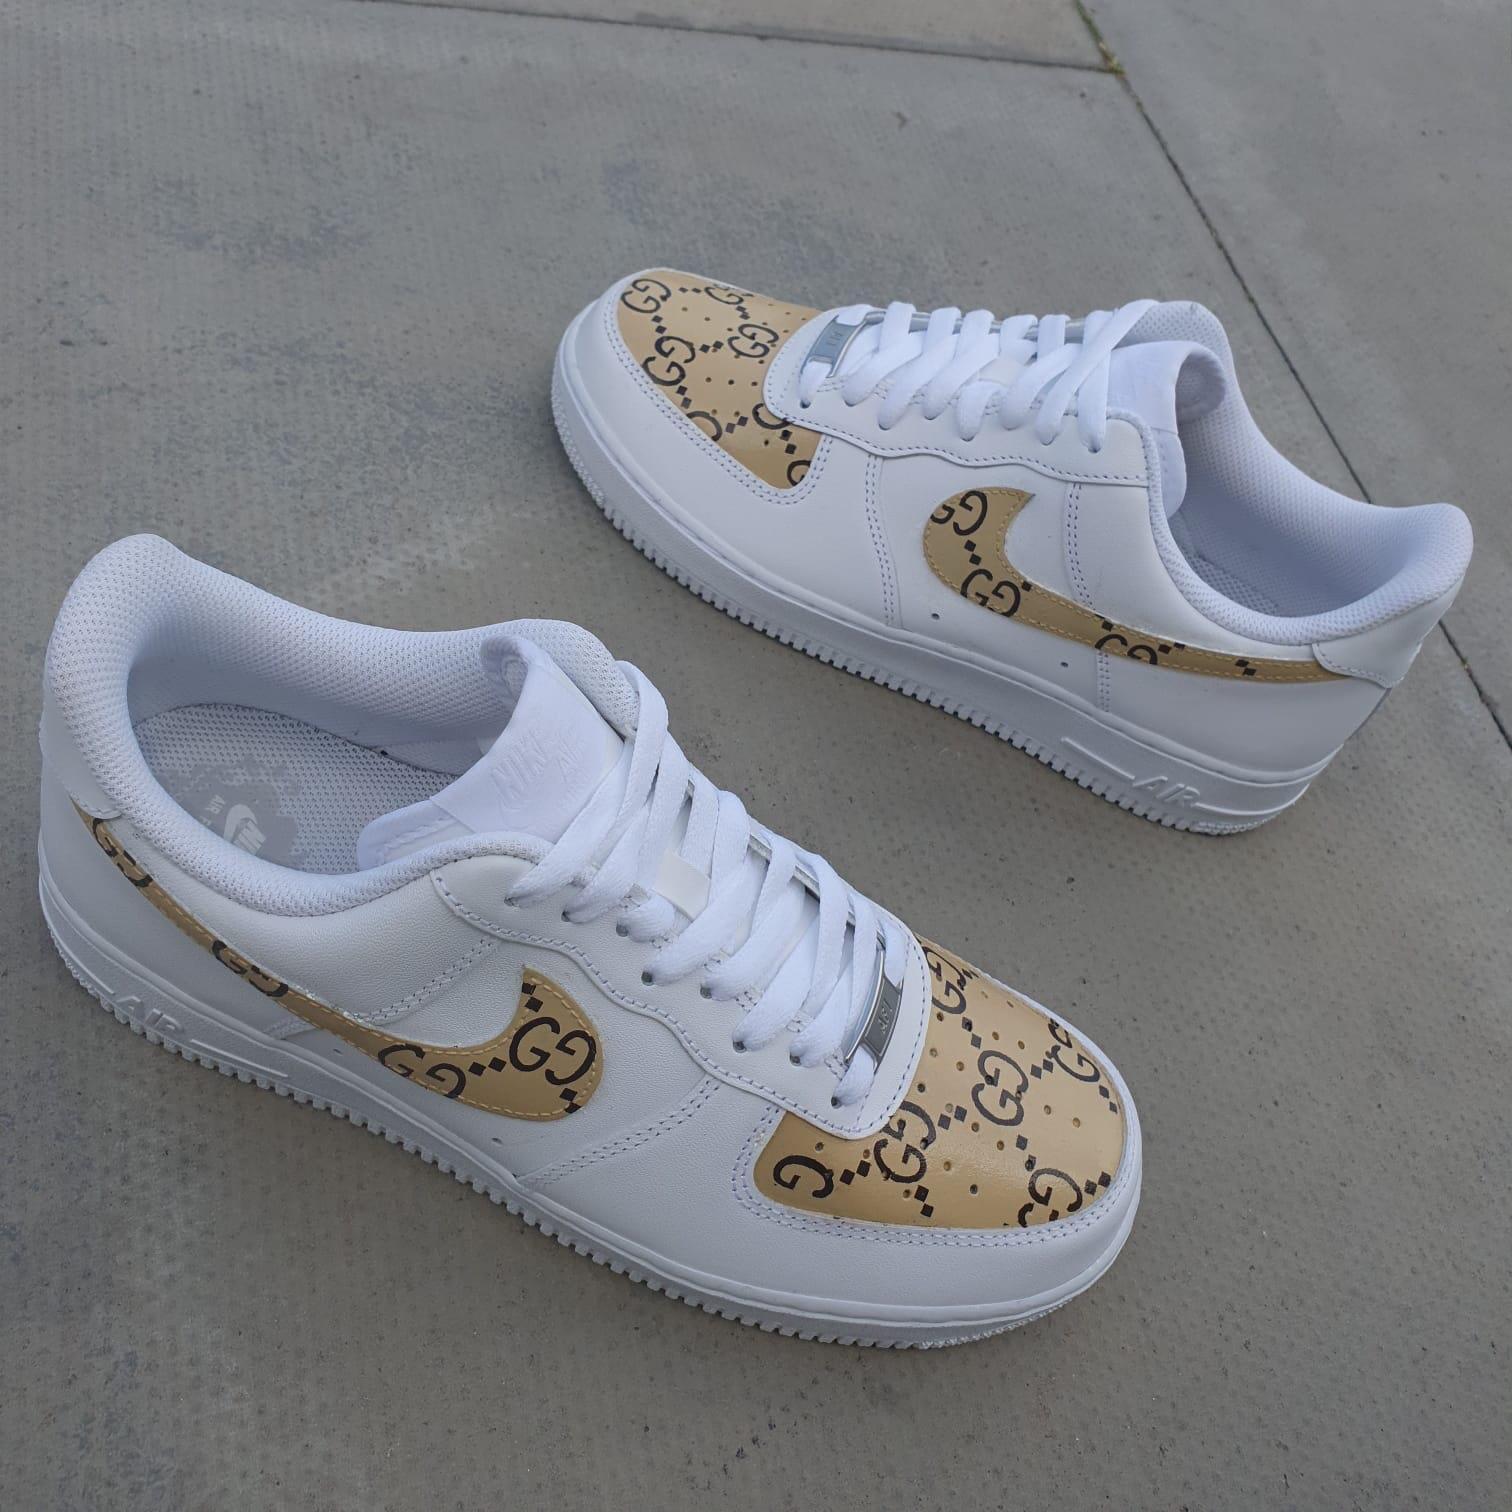 gucci air force ones for sale